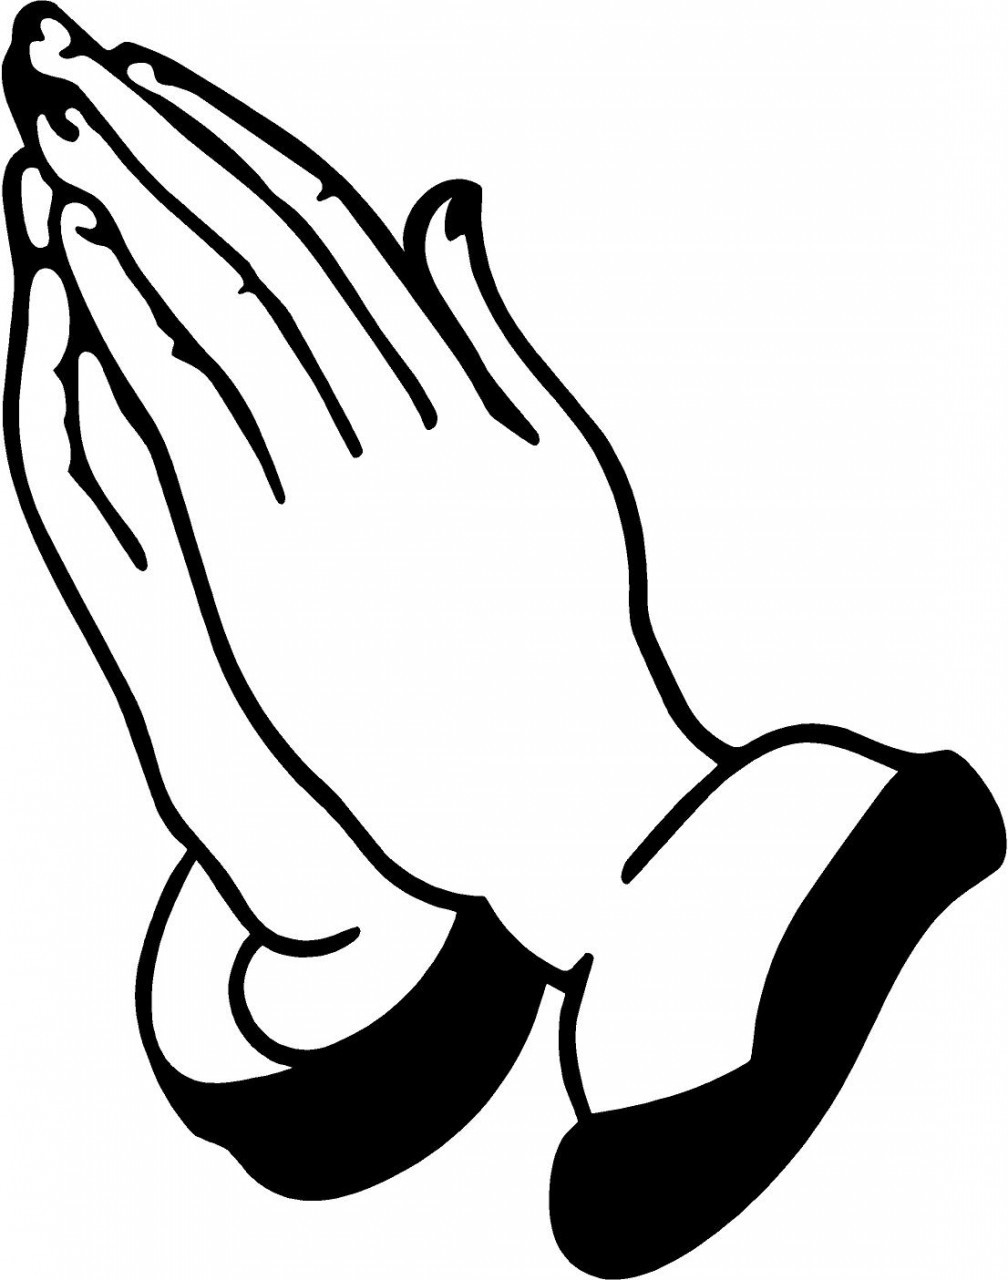 Best Photos of Open Praying Hands Coloring Page - Praying Hands ...